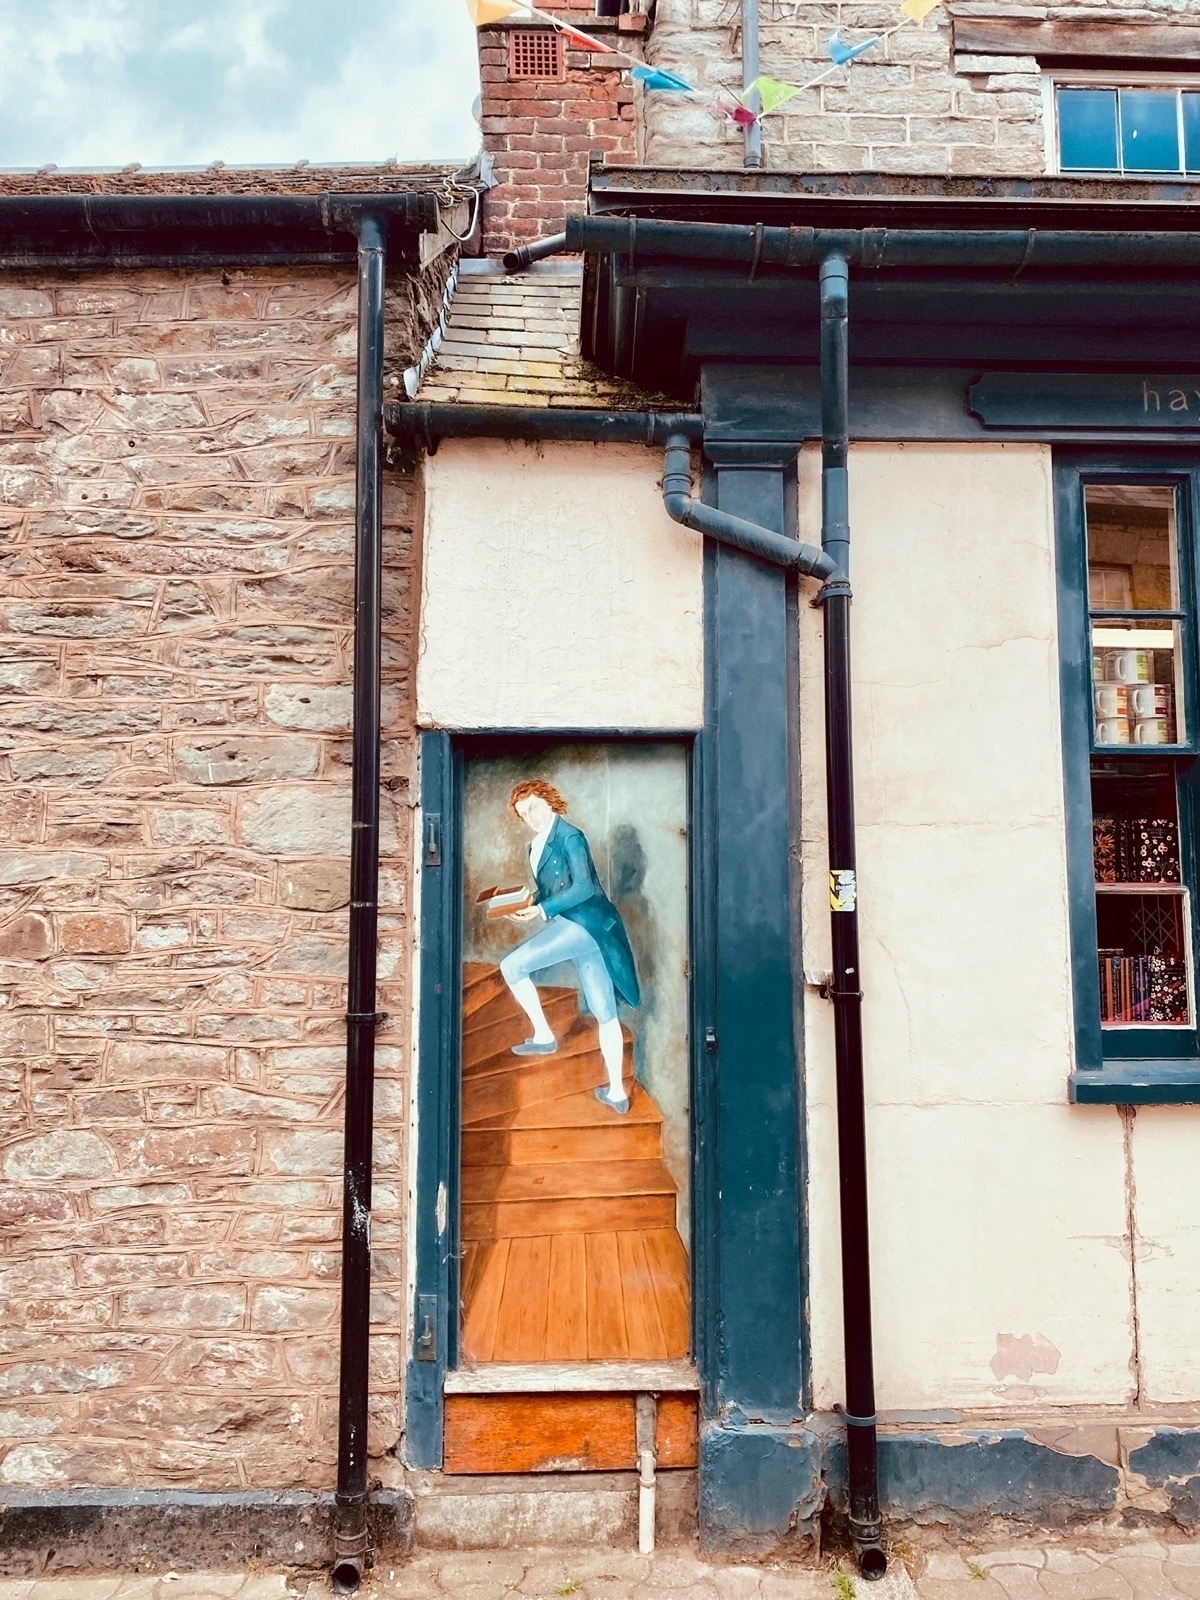 IImitation, painted doorway next to a shop showing a man in old-fashioned clothes holding a book and ascending a wooden staircase